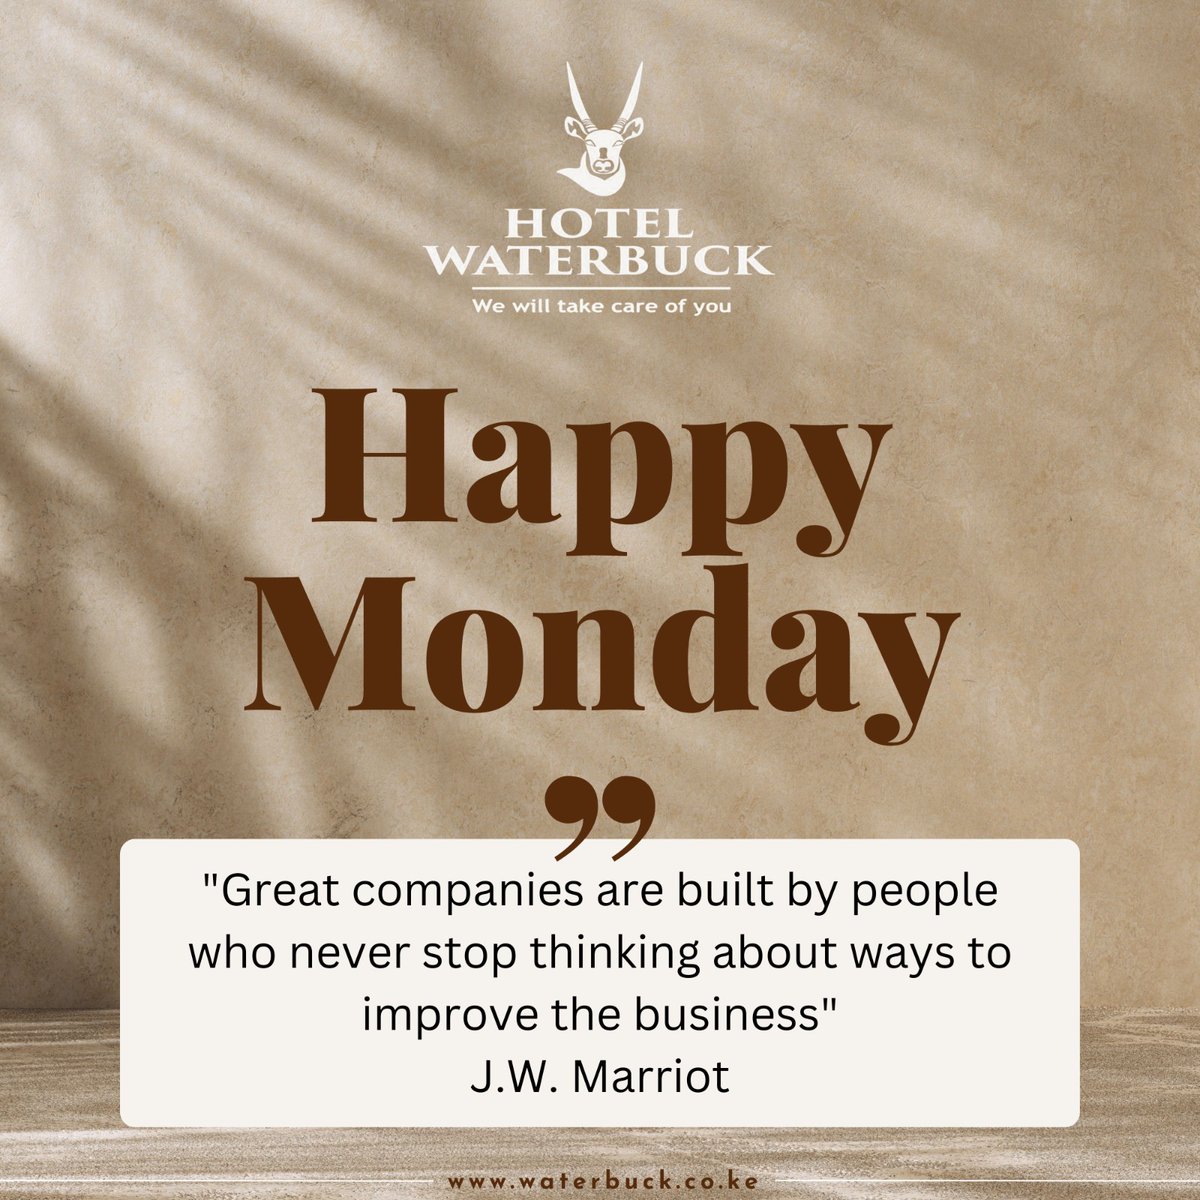 'Great companies are built by people who never stop thinking about ways to improve the business' J.W. Marriot